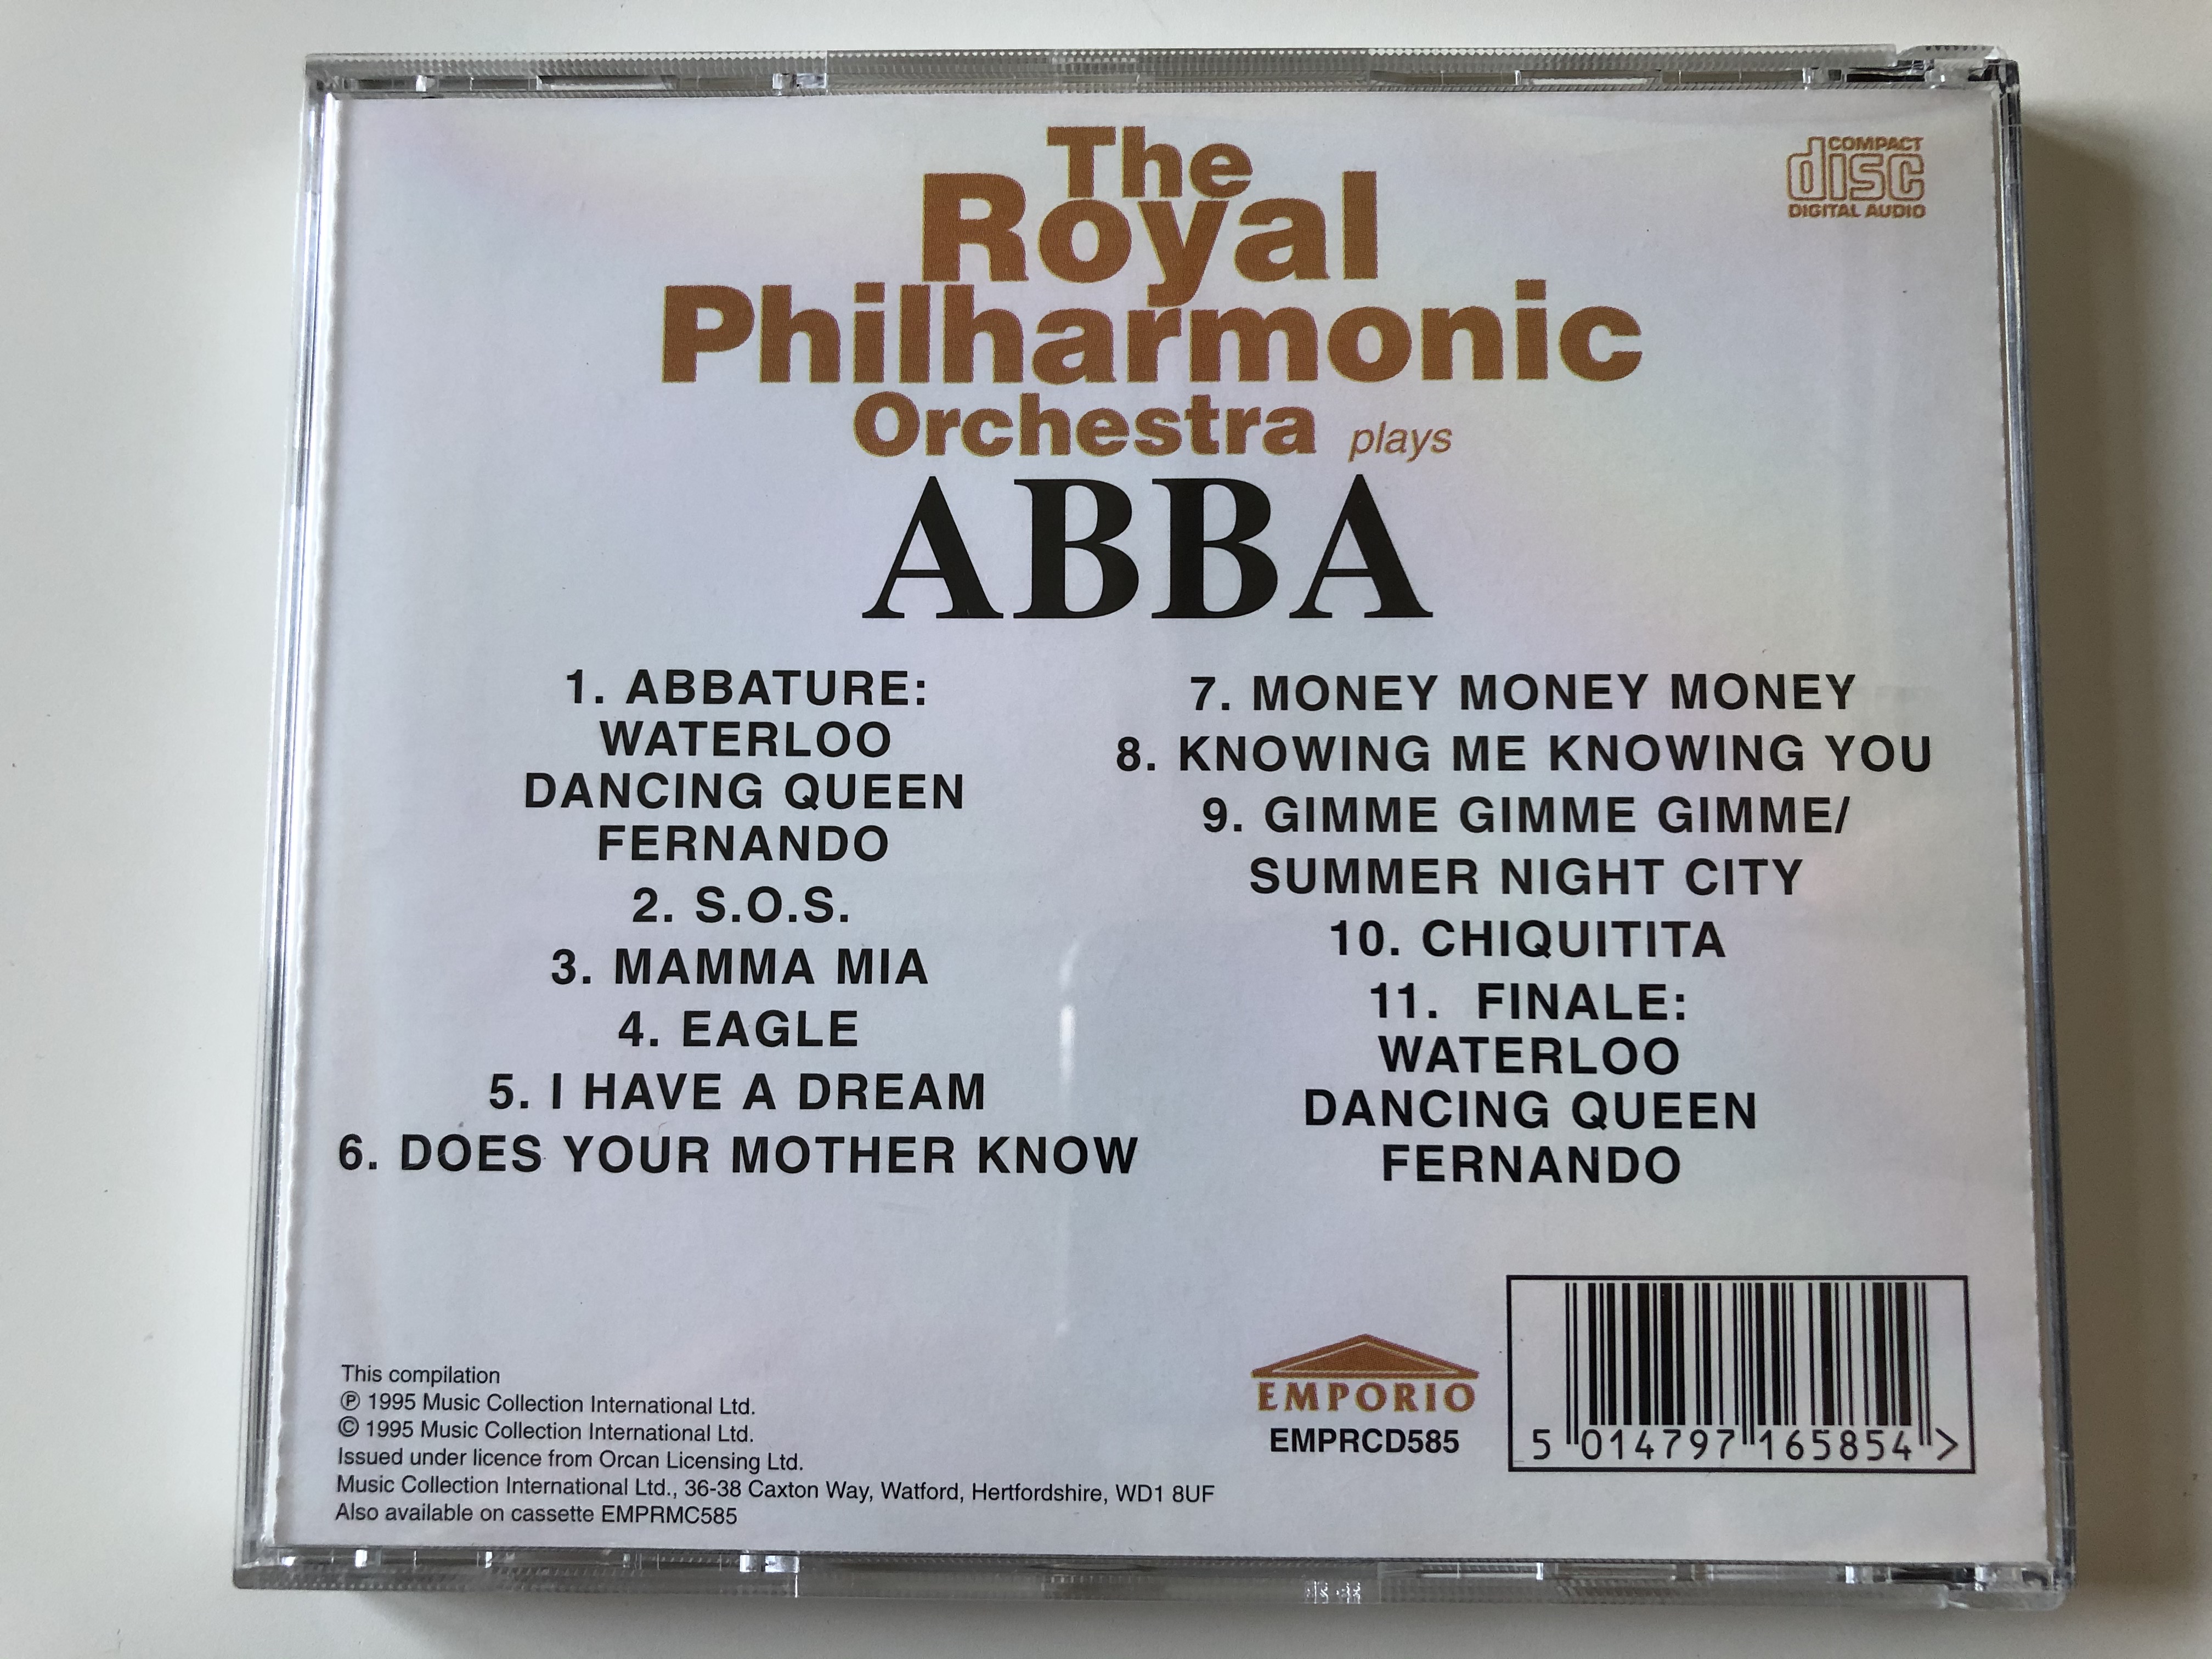 the-royal-philharmonic-orchestra-plays-abba-including-mamma-mia-i-have-a-dream-does-your-mother-know-money-money-money-knowing-me-knowing-you-and-many-more-emporio-audio-cd-1995-empr-4-.jpg